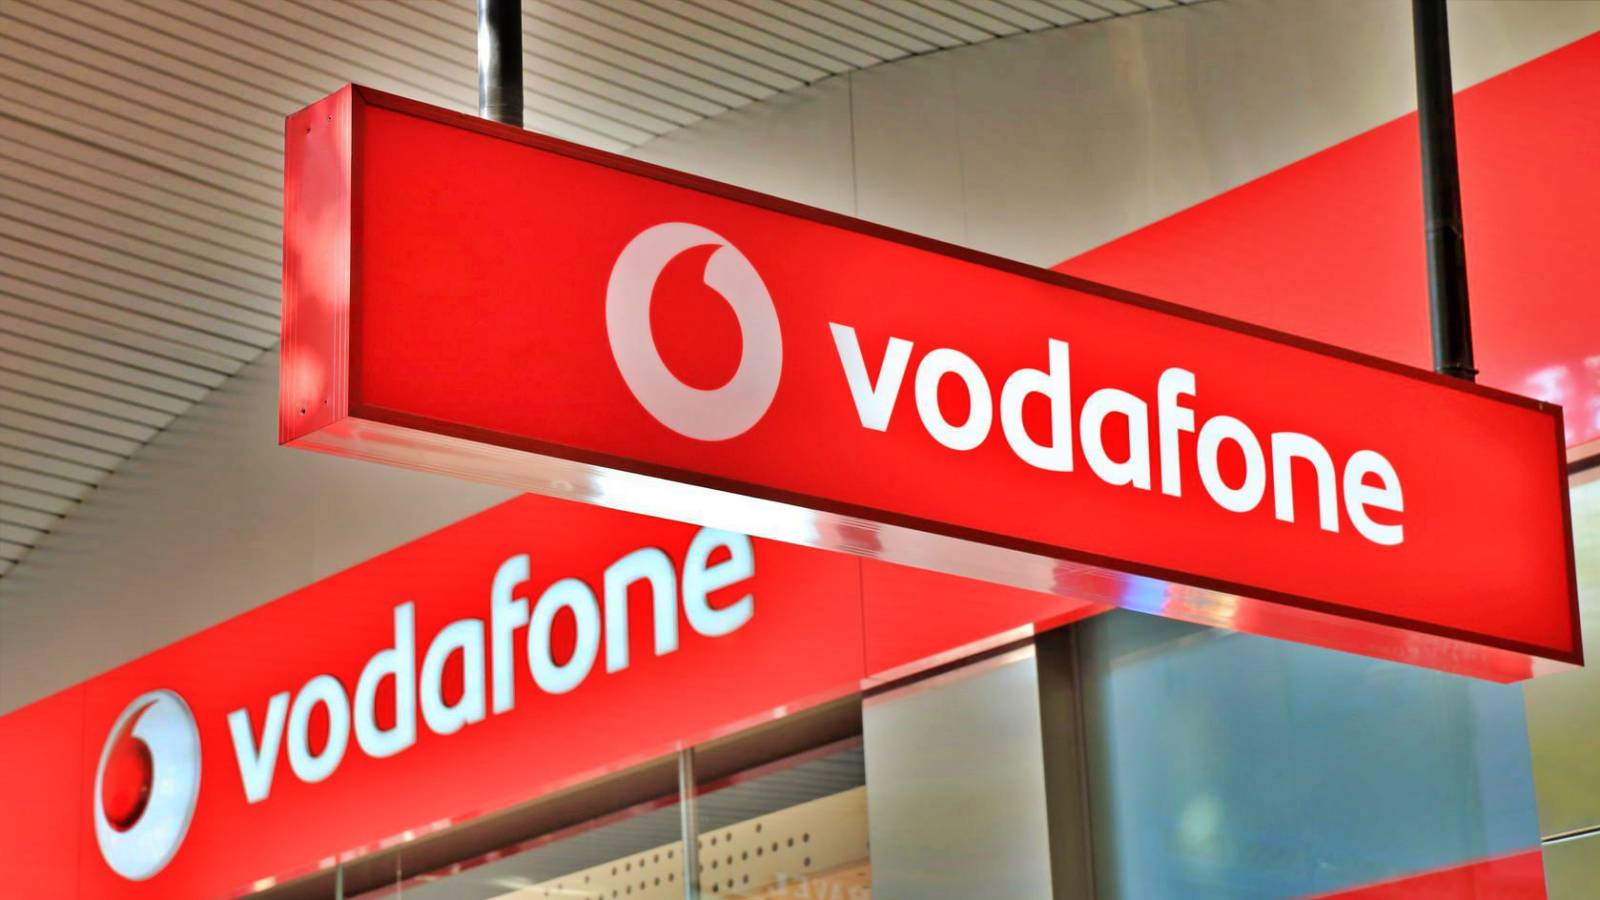 Vodafone customers are notified FREE of charge by the operator for 3 months